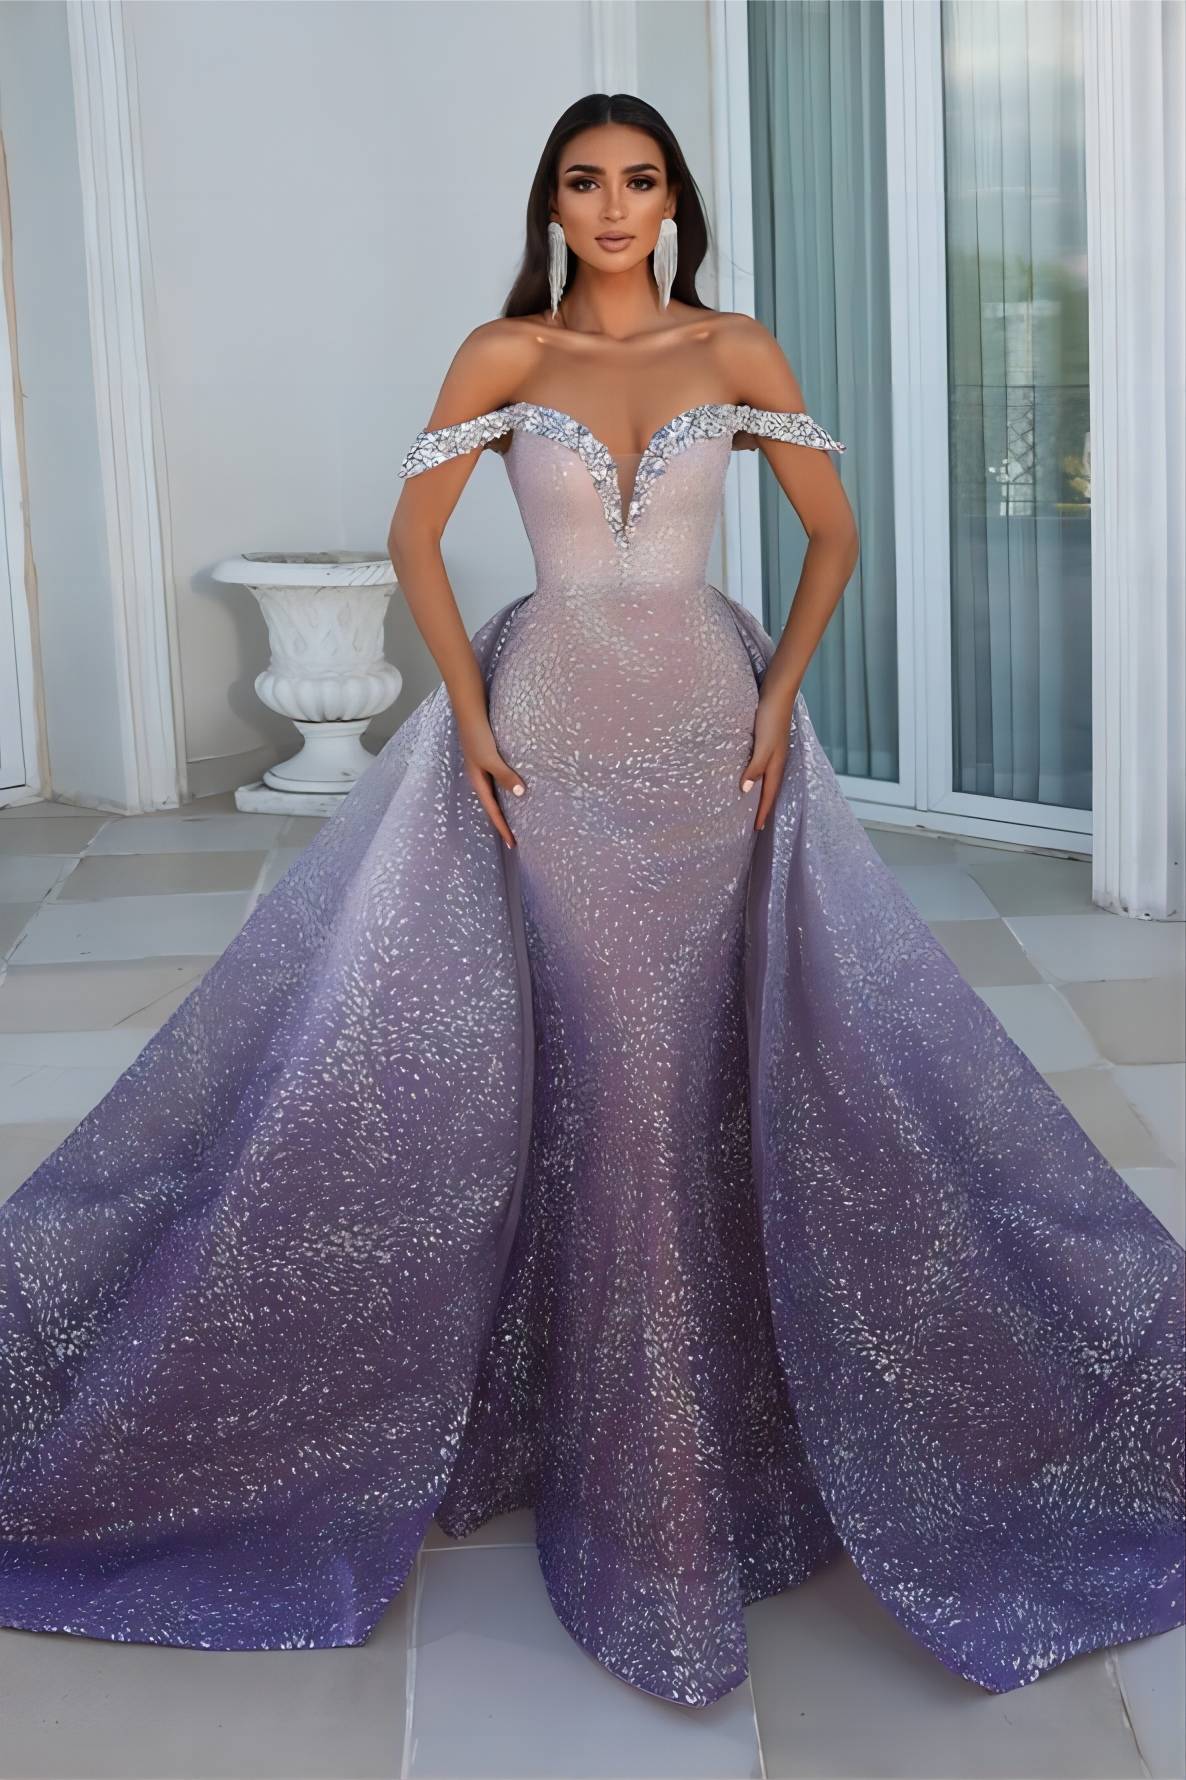 Purple Embroidered Gowns Online Shopping for Women at Low Prices